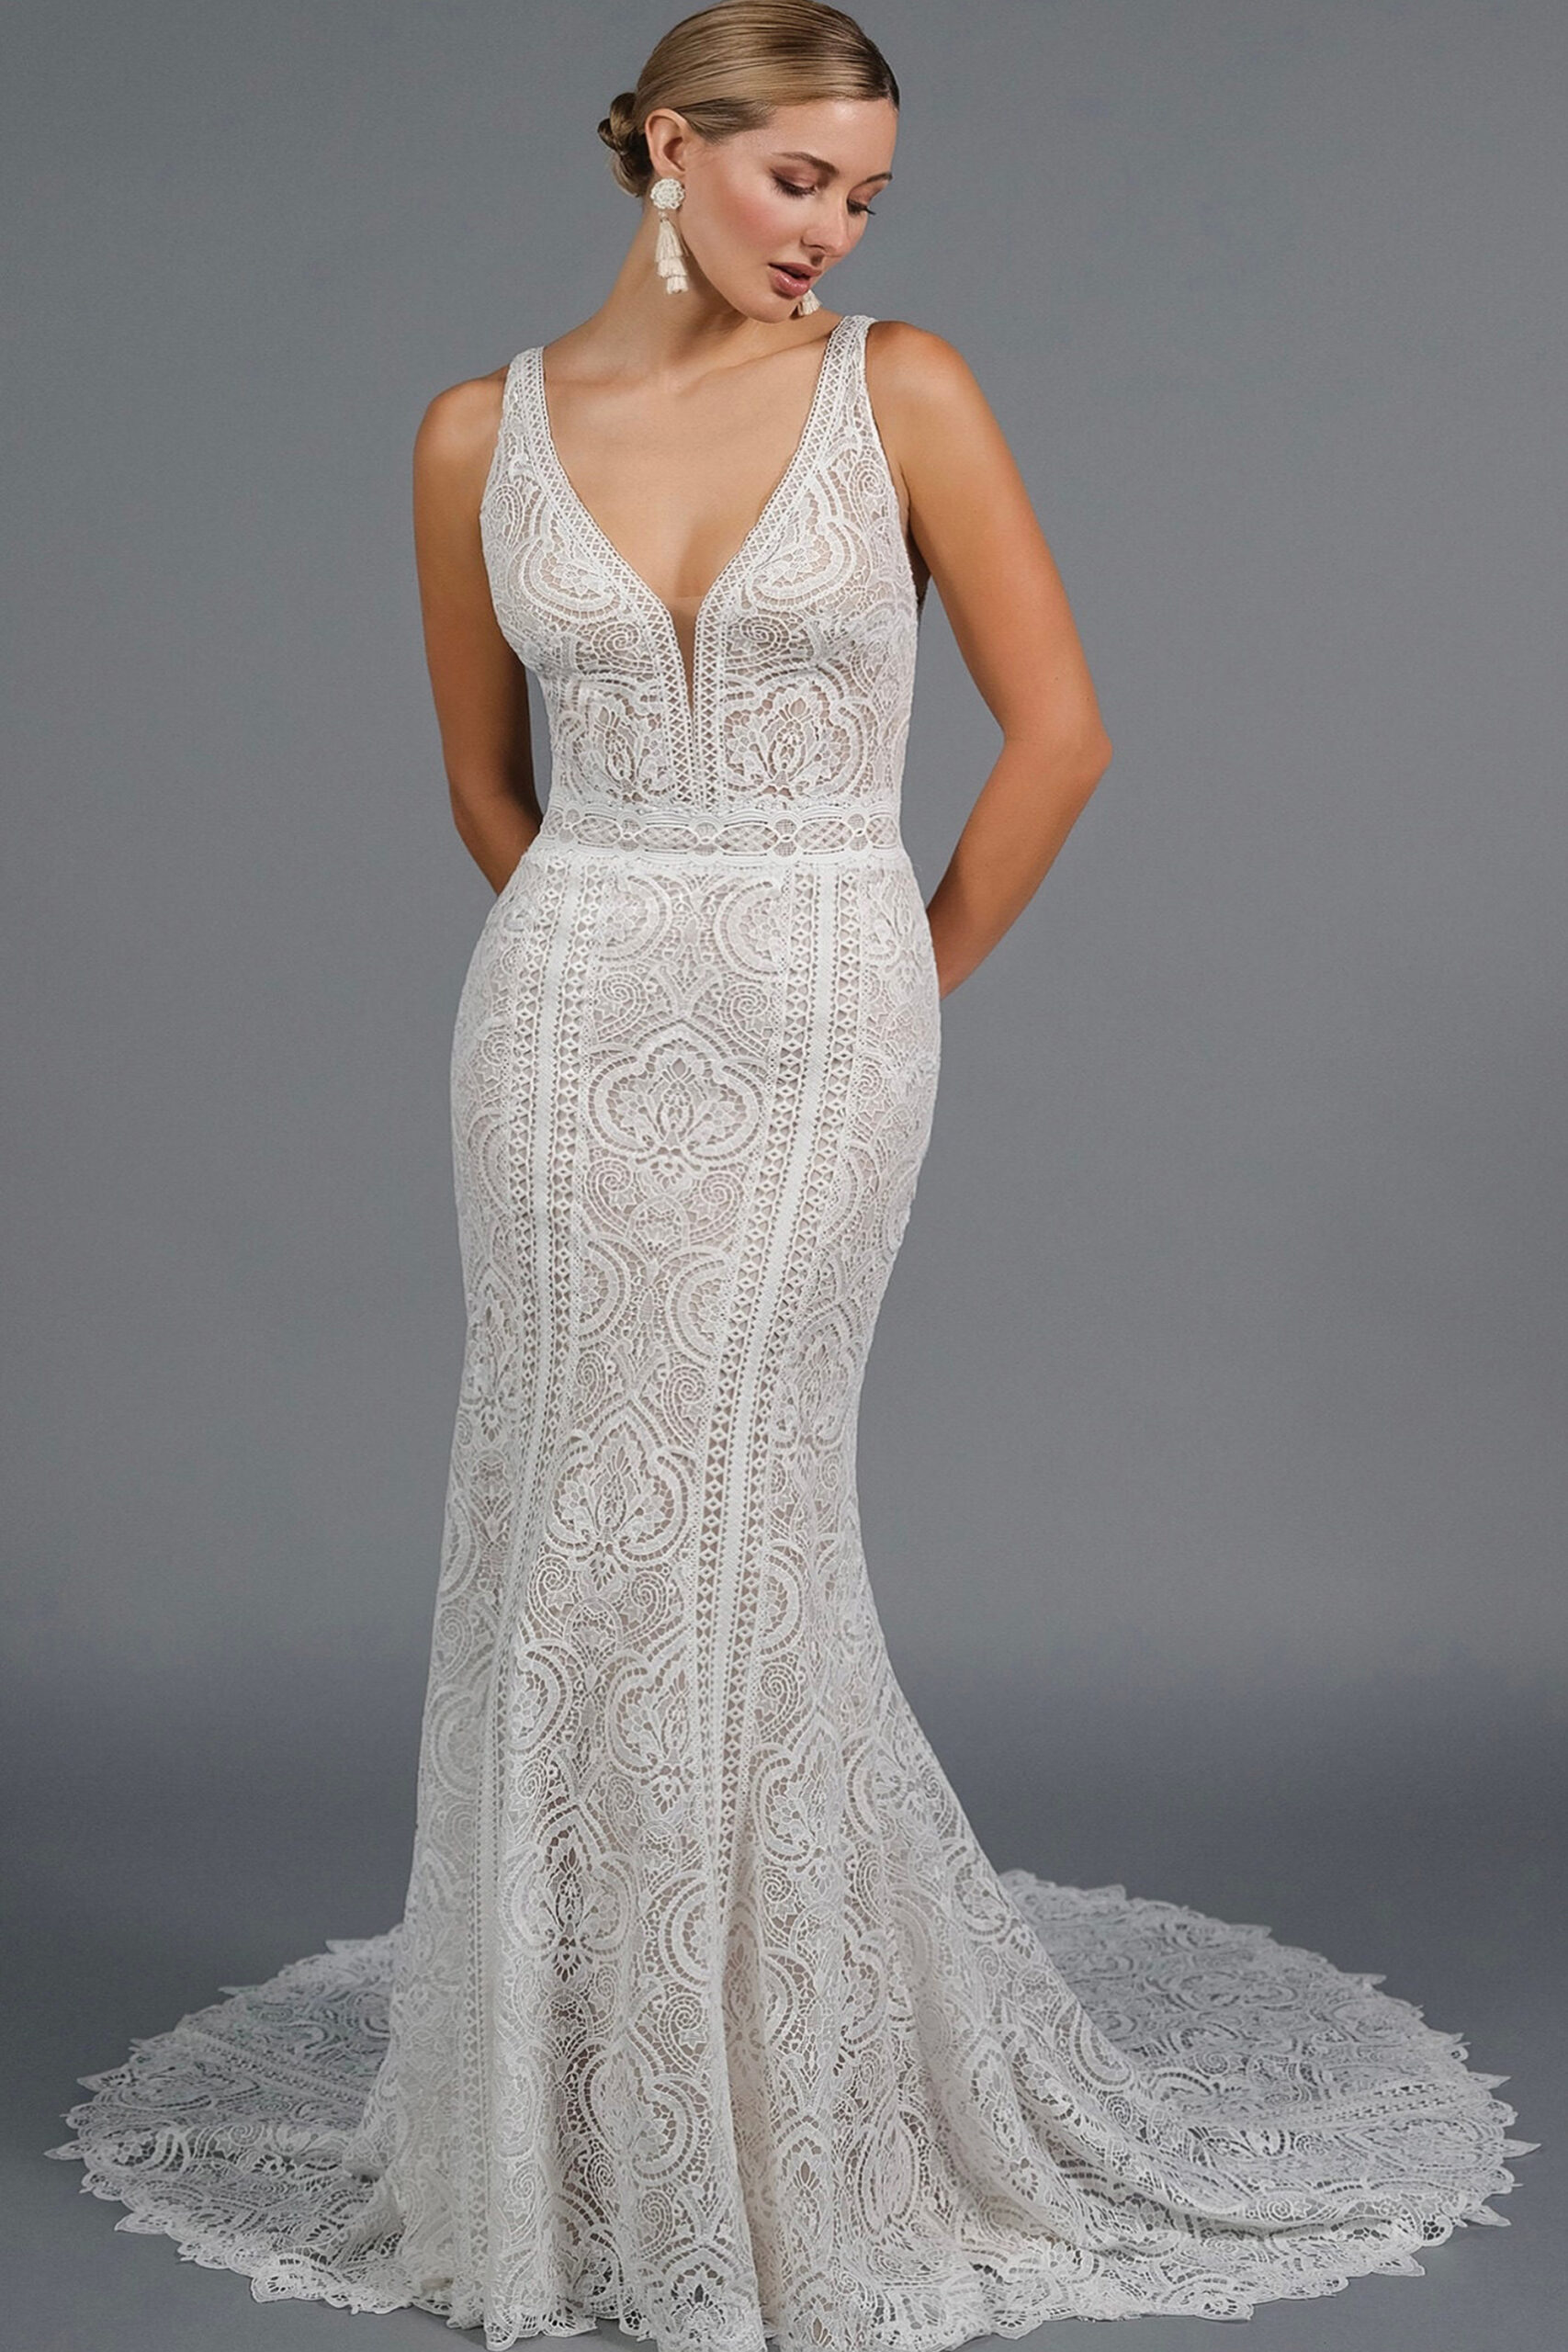 Dress Collections - Grace Bridal